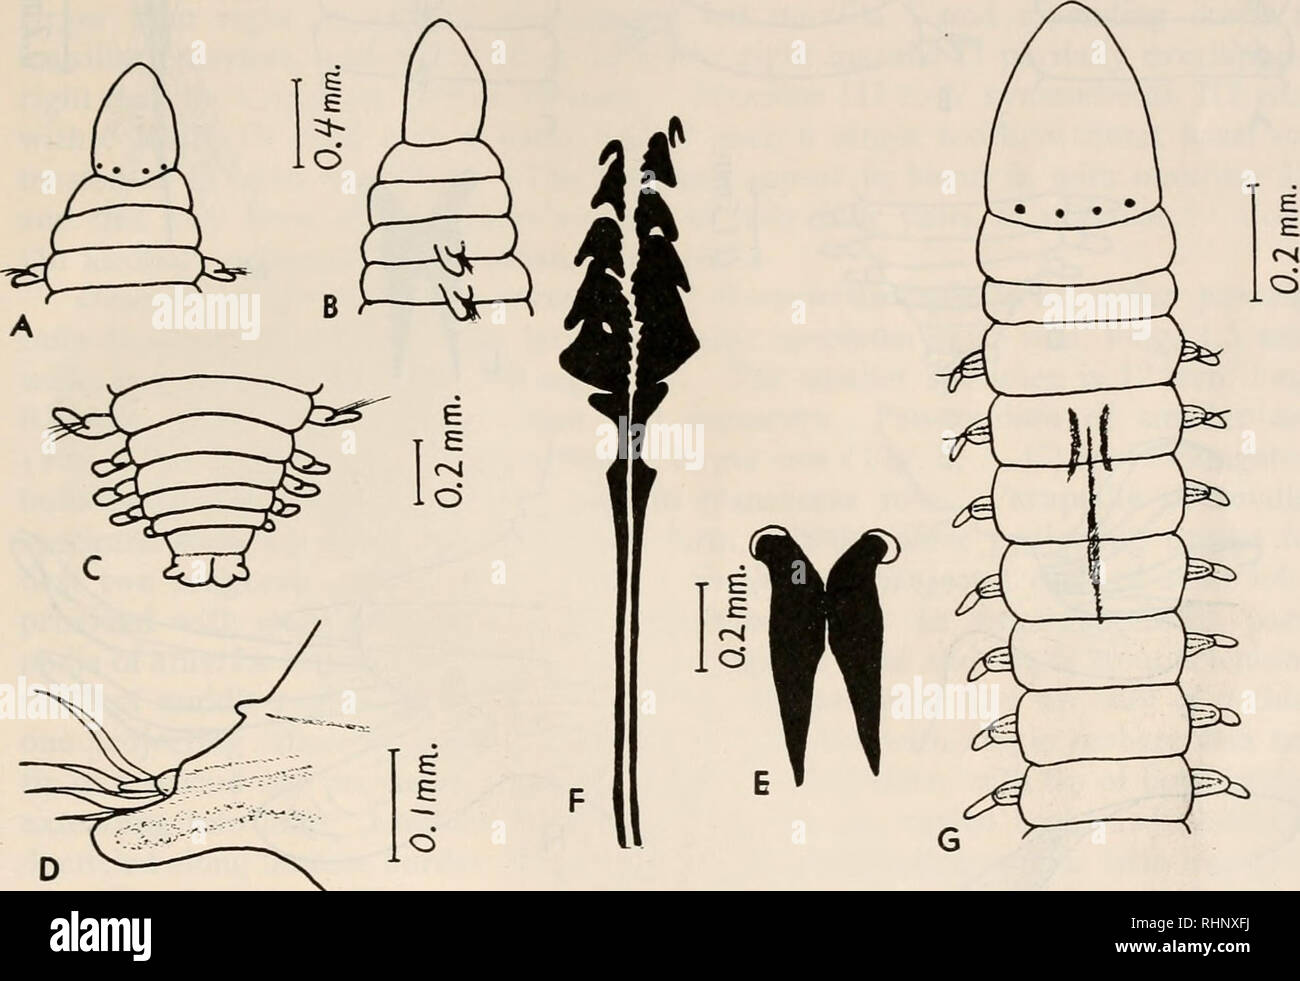 . The Biological bulletin. Biology; Zoology; Biology; Marine Biology. ENDOPARASITIC POLYCHAETOUS ANNELIDS 183 Description of specimens found free-living. Length 40-110+ mm., width 1-4 mm., segments 140-220+. Body cylindrical, tapering slightly anteriorly and posteriorly, stiff, wiry. Prostomium (Figs. 3, A, B; 4, A, B) subconical, rounded anteriorly, slightly depressed dorsoventrally but not greatly flattened as in Drilo- nereis; a pair of faint longitudinal grooves ventrally and four eyes in transverse row at posterodorsal border, rather than two eyes as reported by Moore. First two seg- ment Stock Photo